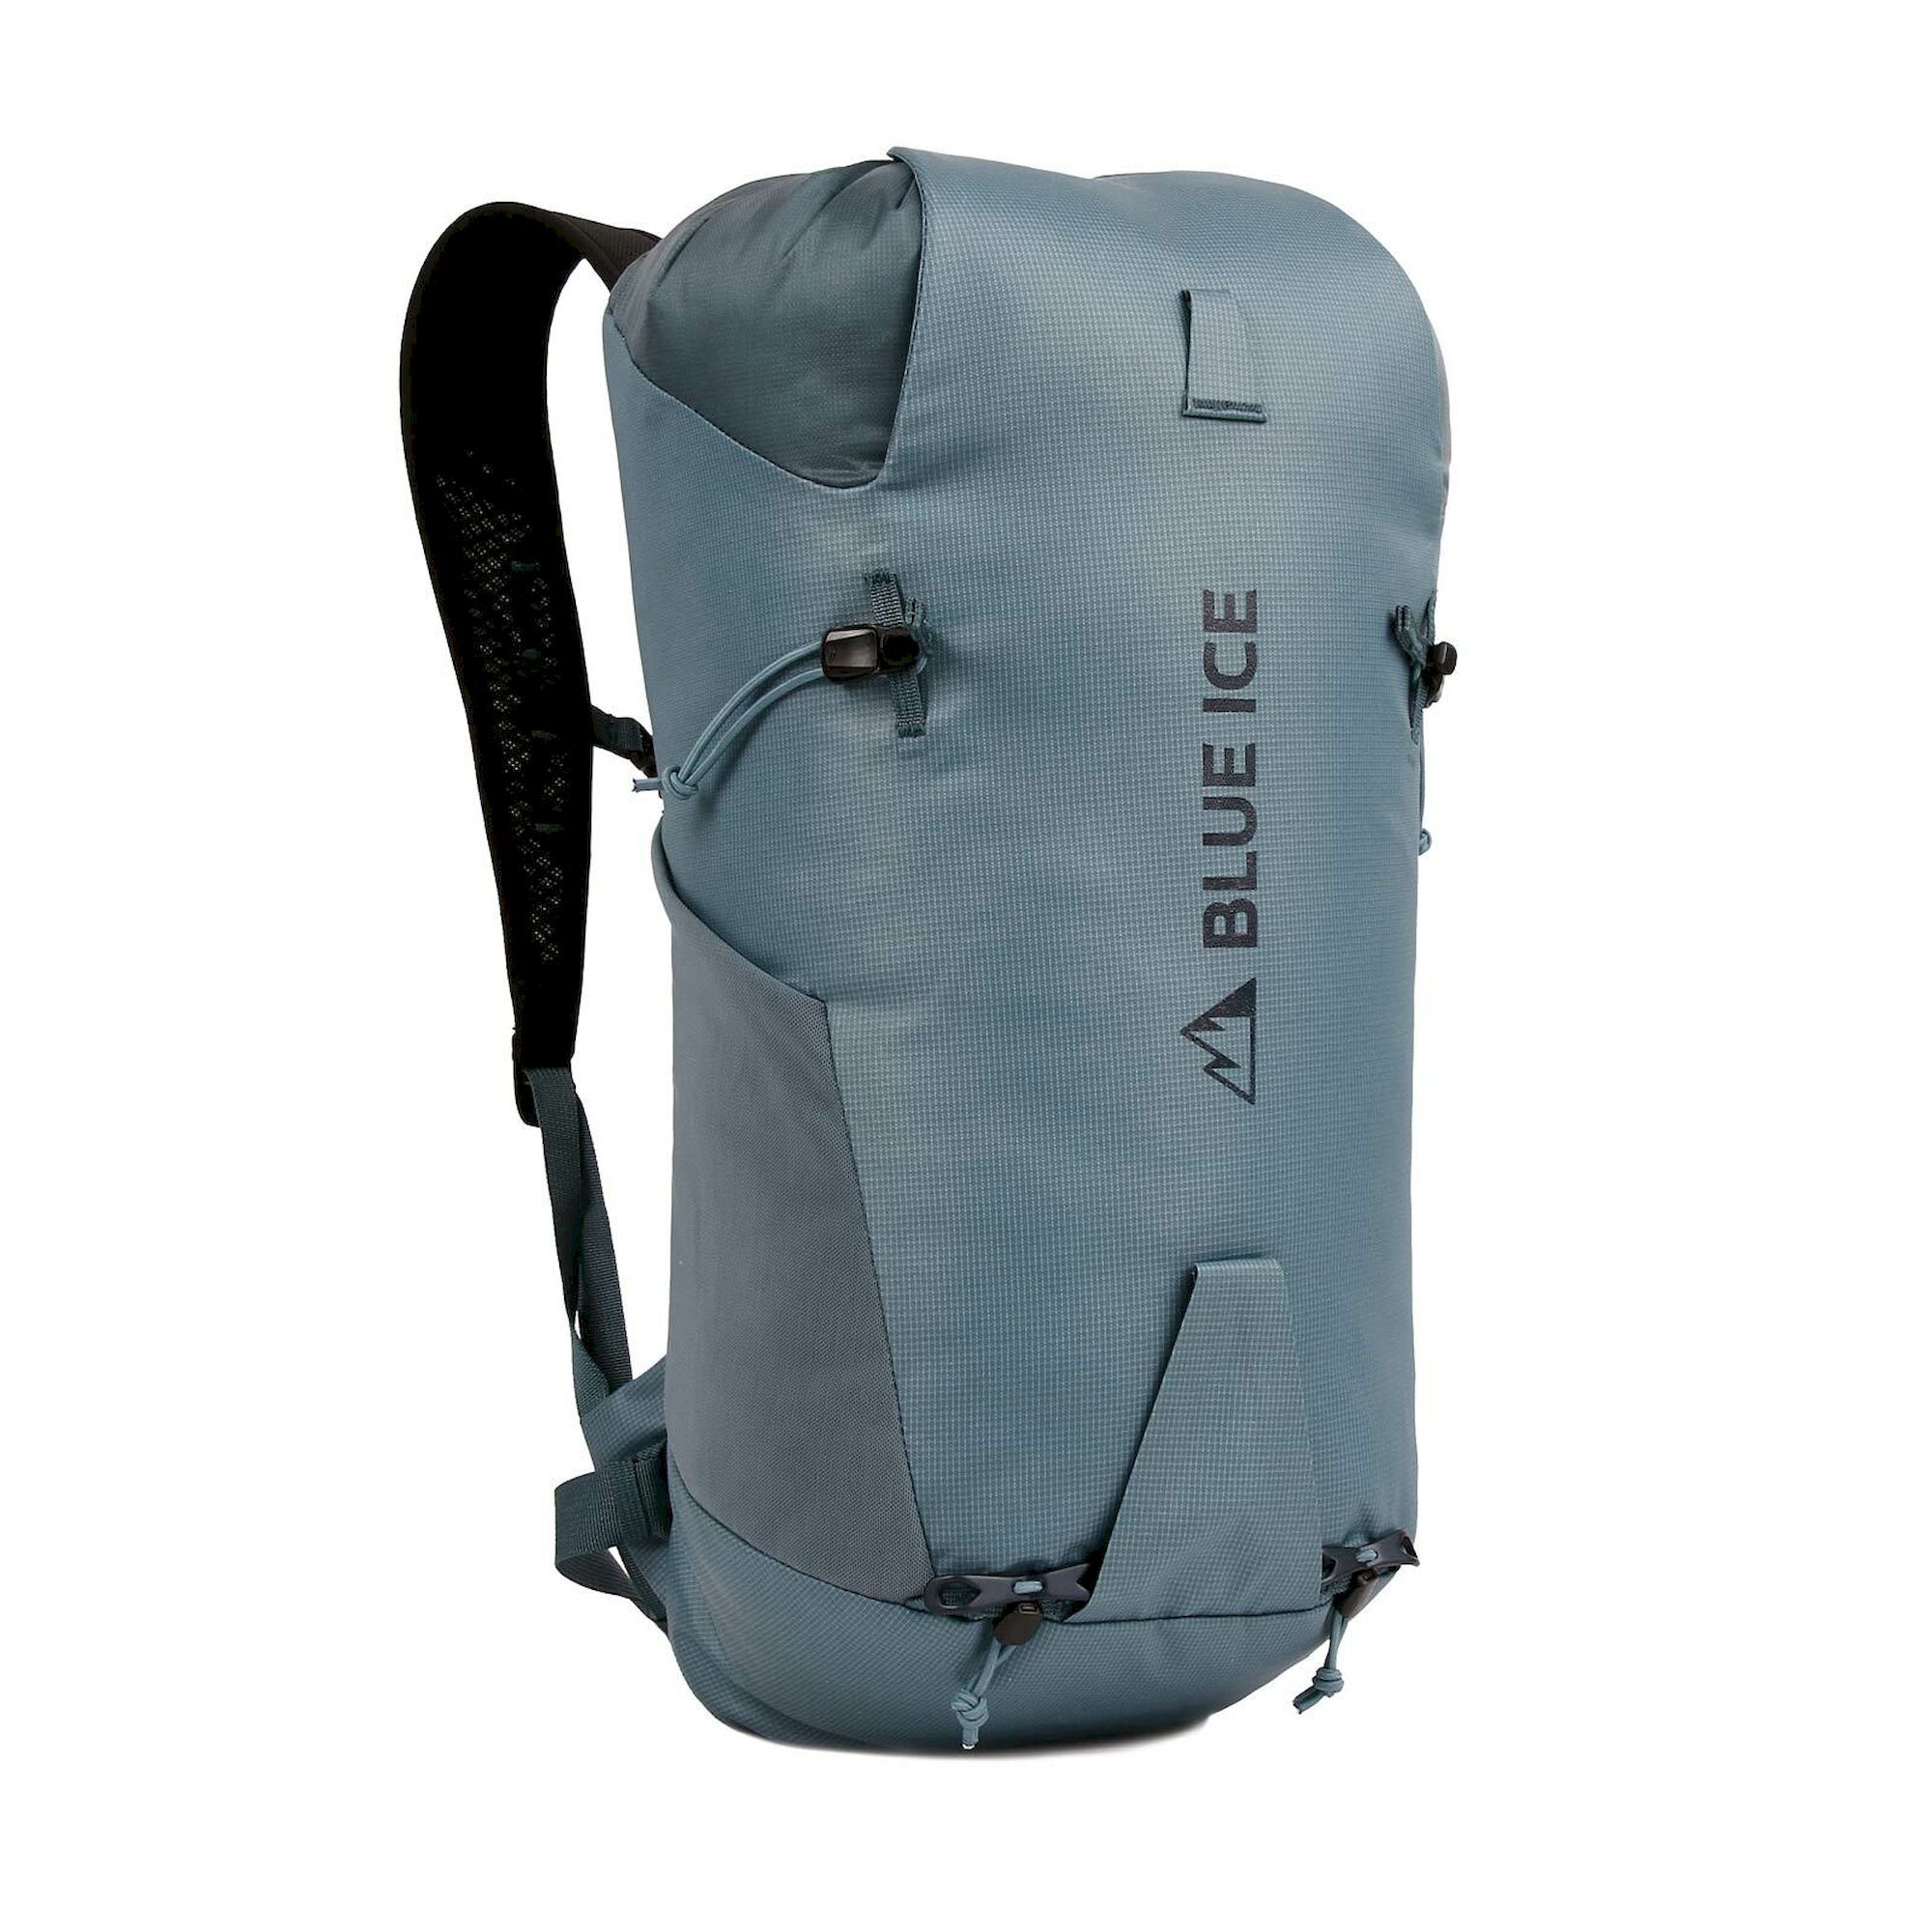 Blue Ice Dragonfly 18 - Mountaineering backpack